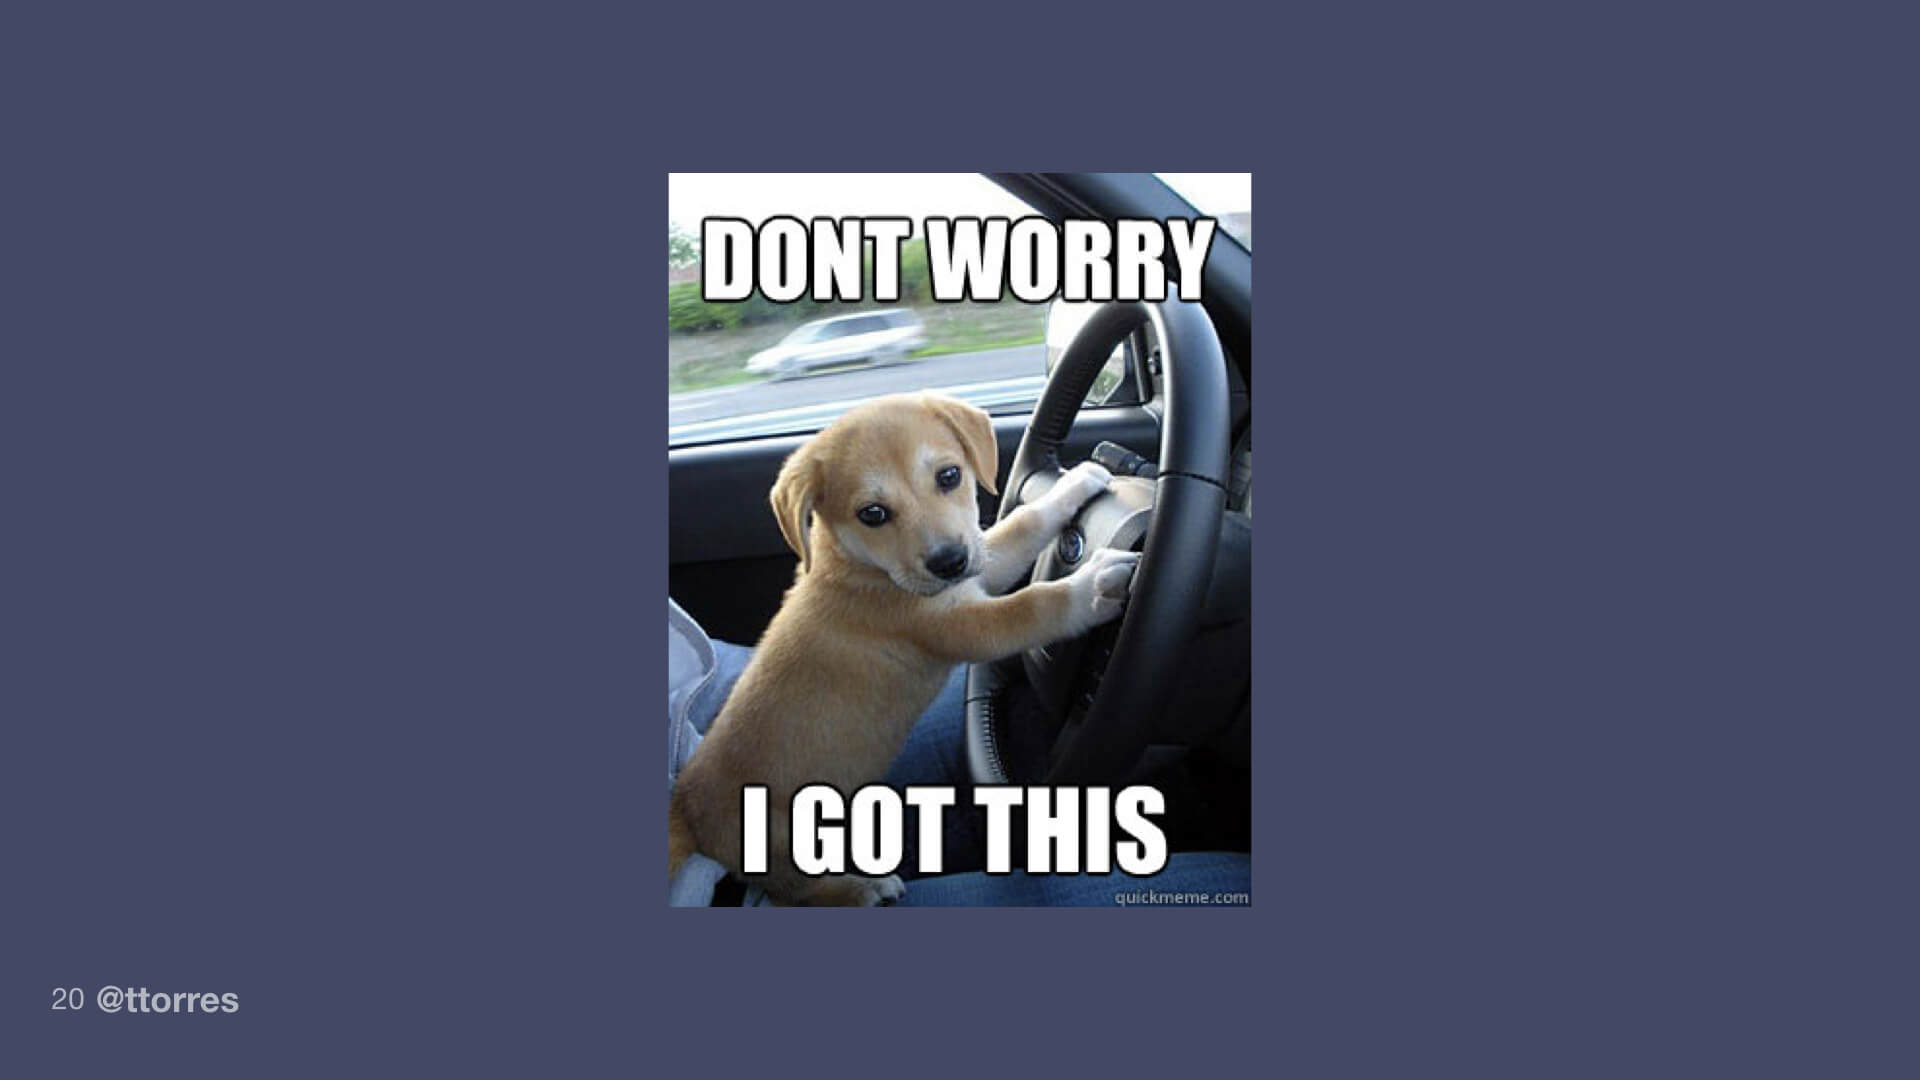 An image of a small puppy with its paws on the steering wheel of a car. The text on the image reads, "Don't worry I got this."